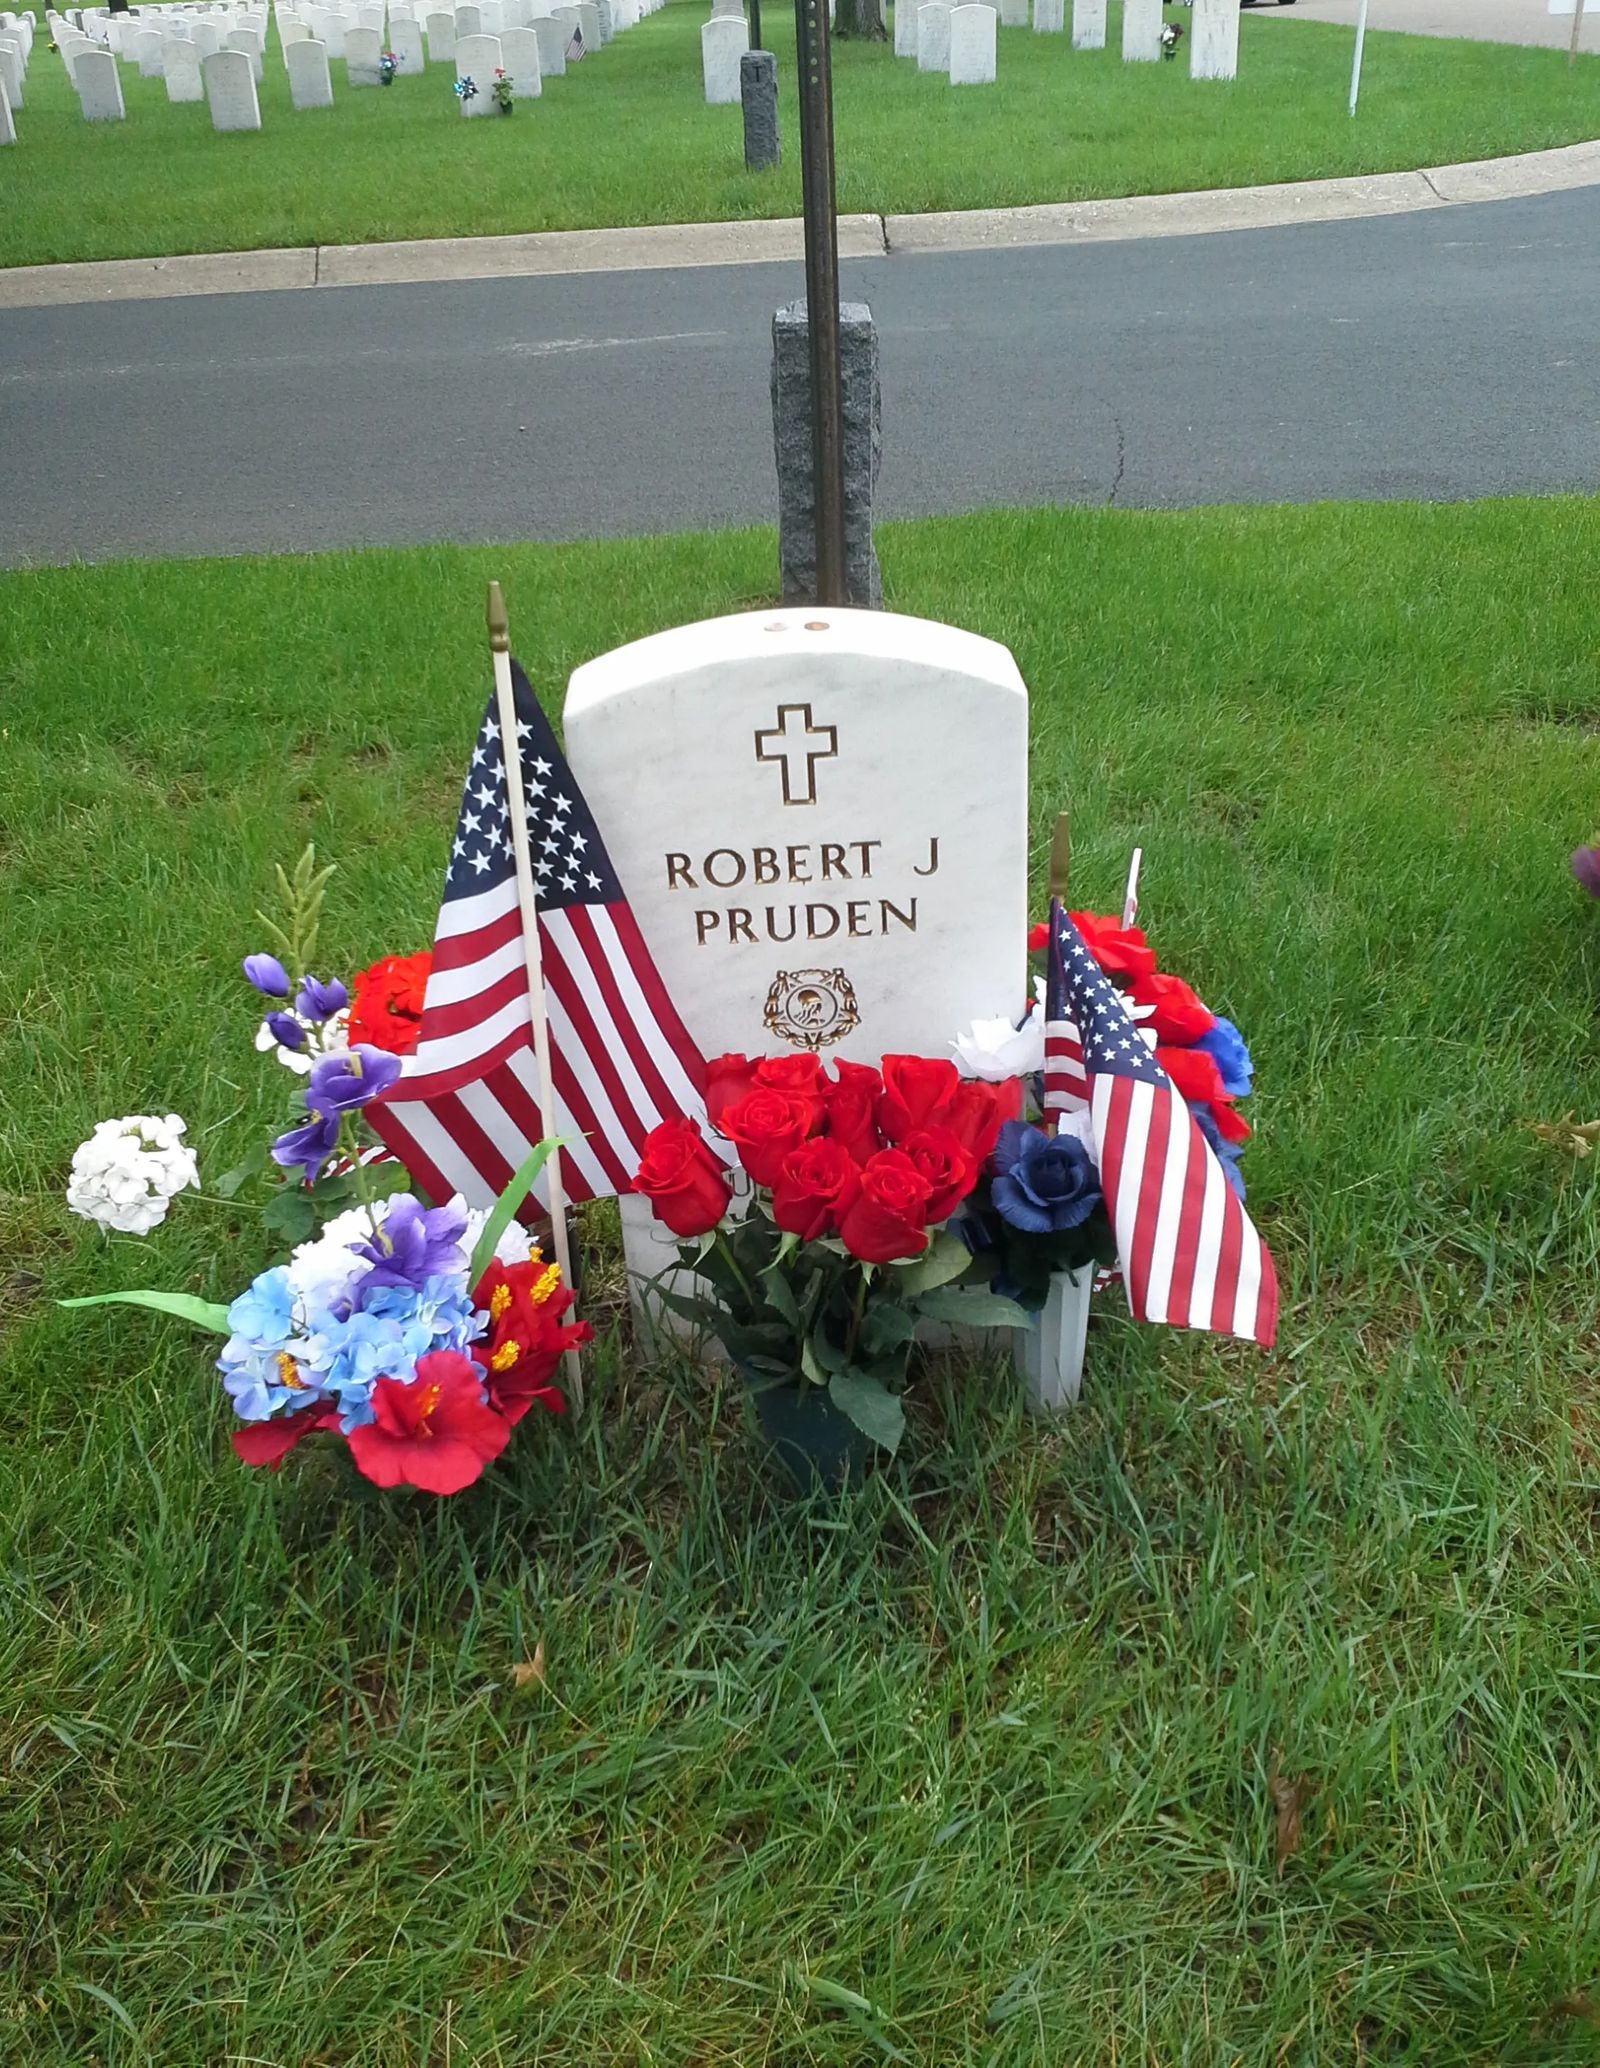 Photo of the grave marker for U.S. Army Ranger Staff Sergeant Robert J Pruden of St. Paul, Minnesota, posthumously awarded the Congressional Medal of Honor for conspicuous gallantry and intrepidity above and beyond the call of duty during the Vietnam War, in Fort Snelling National Cemetery.